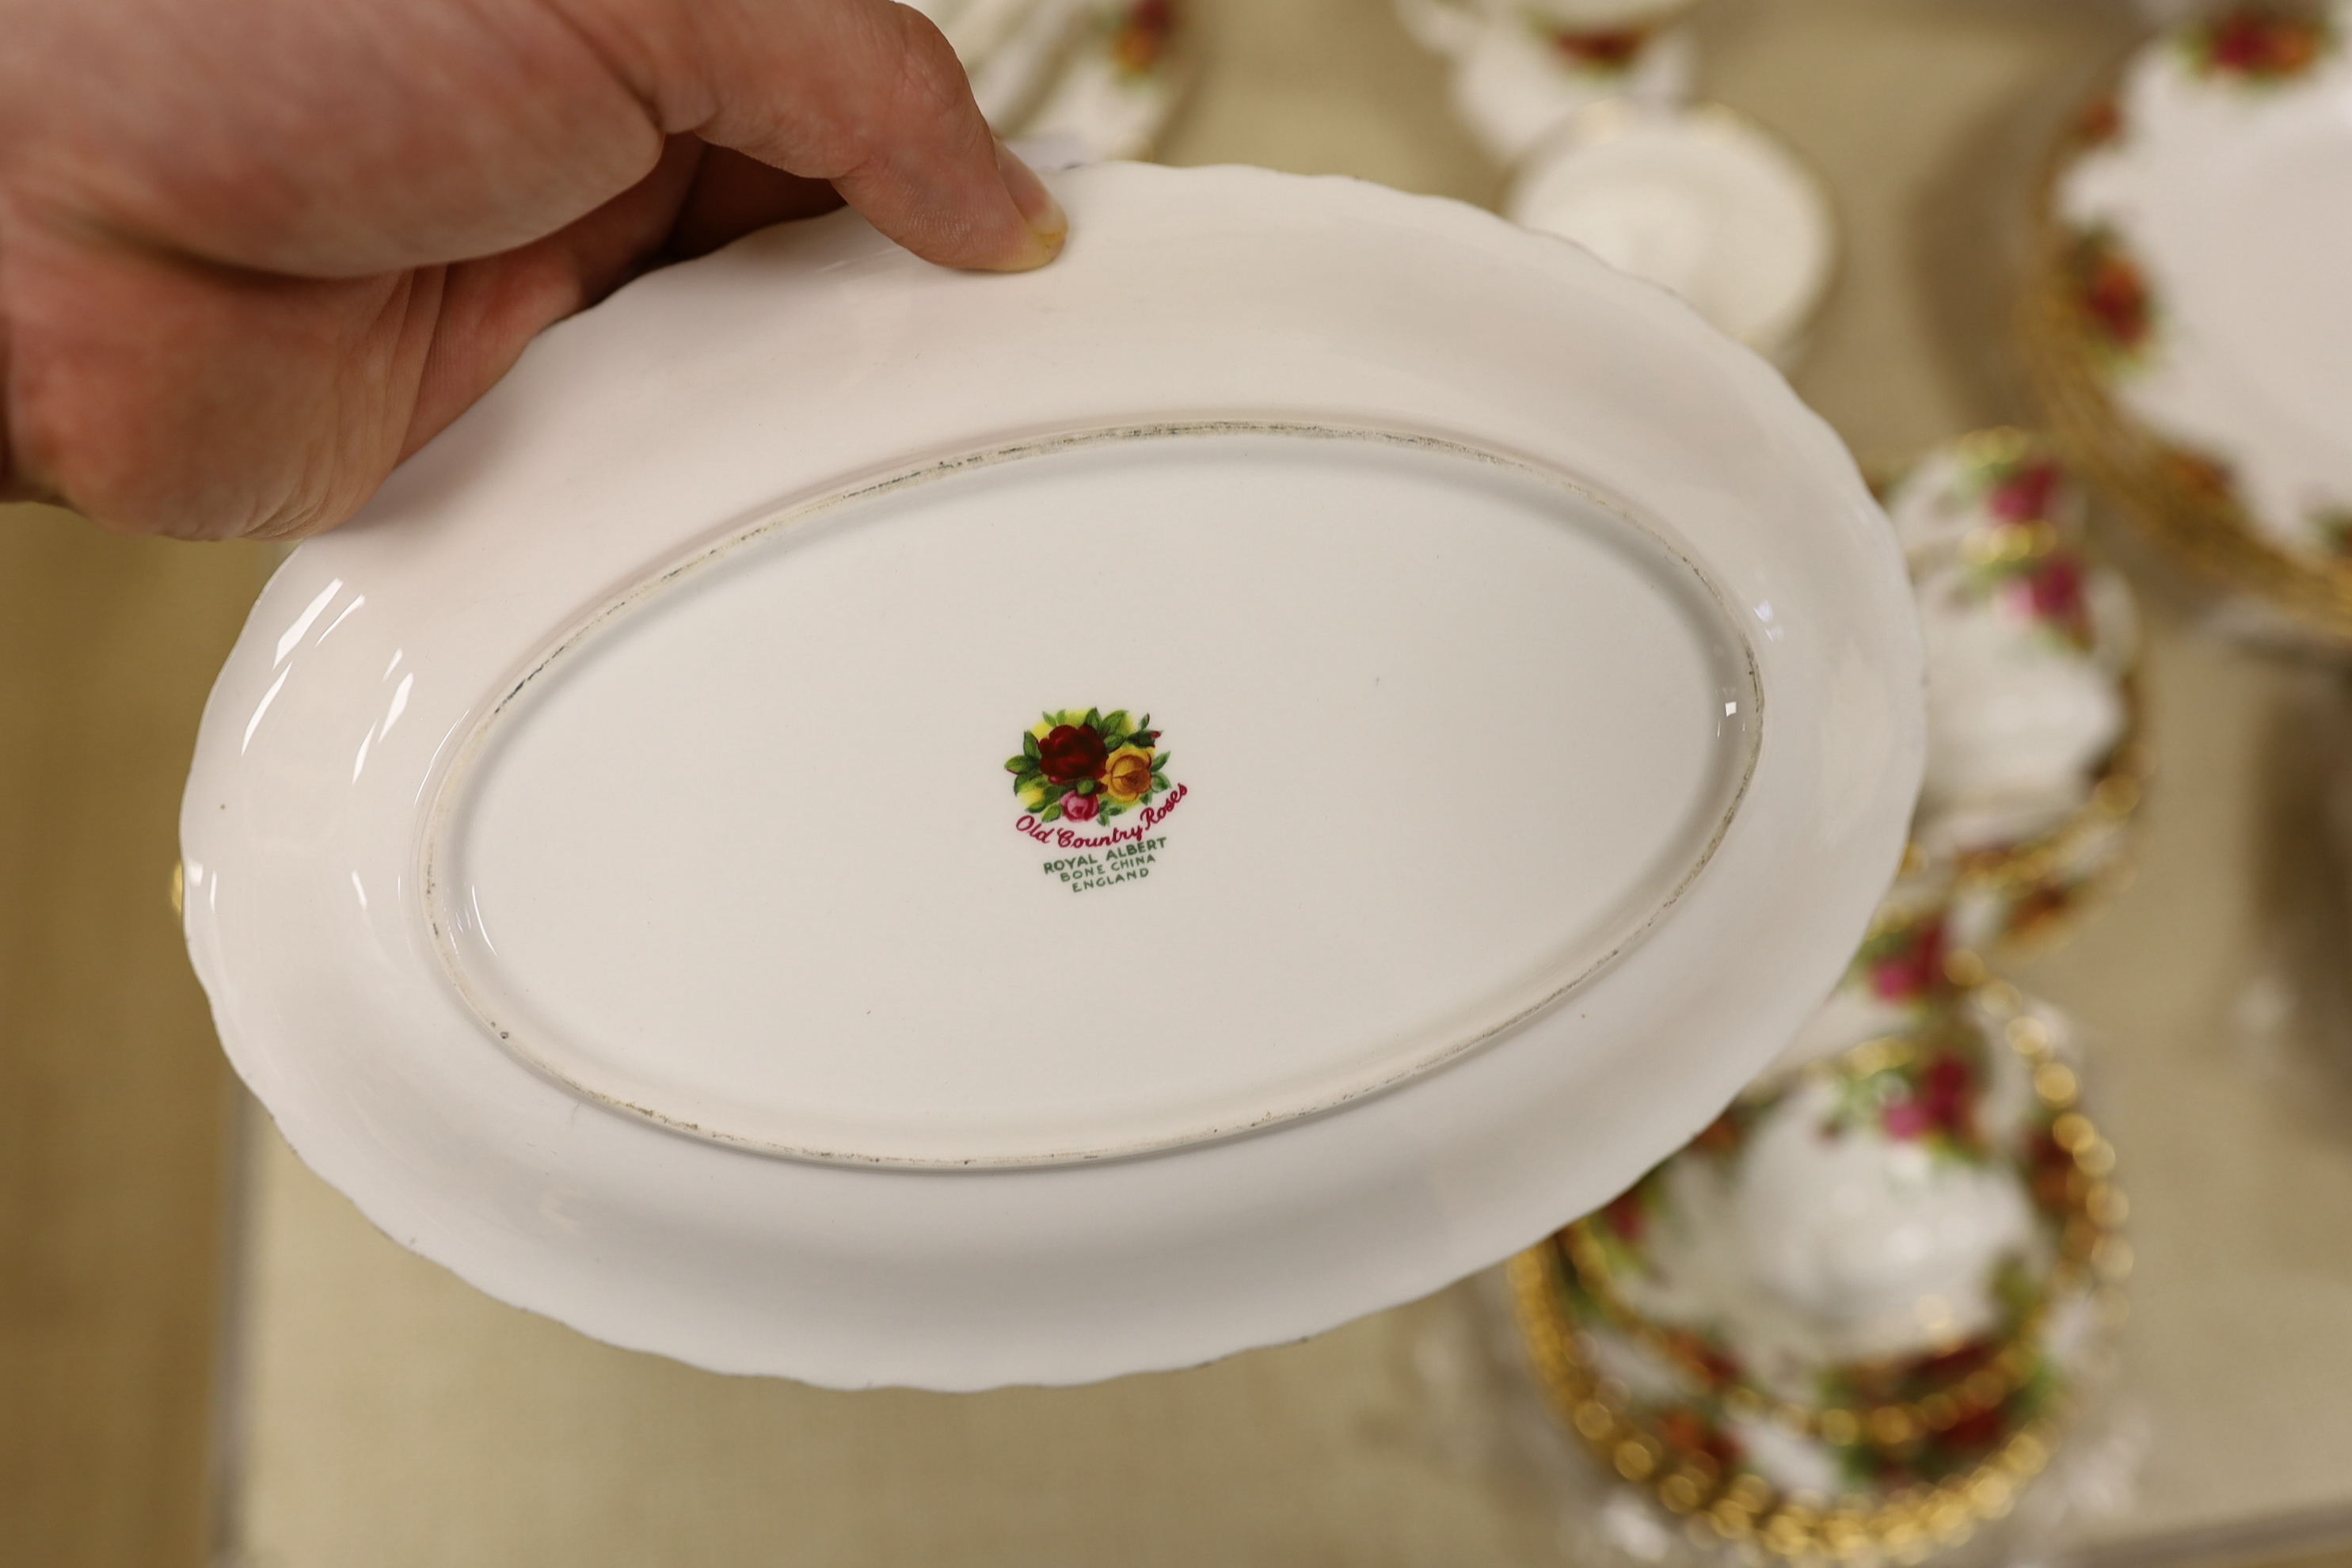 A collection of Royal Albert Old Country Roses dinnerware